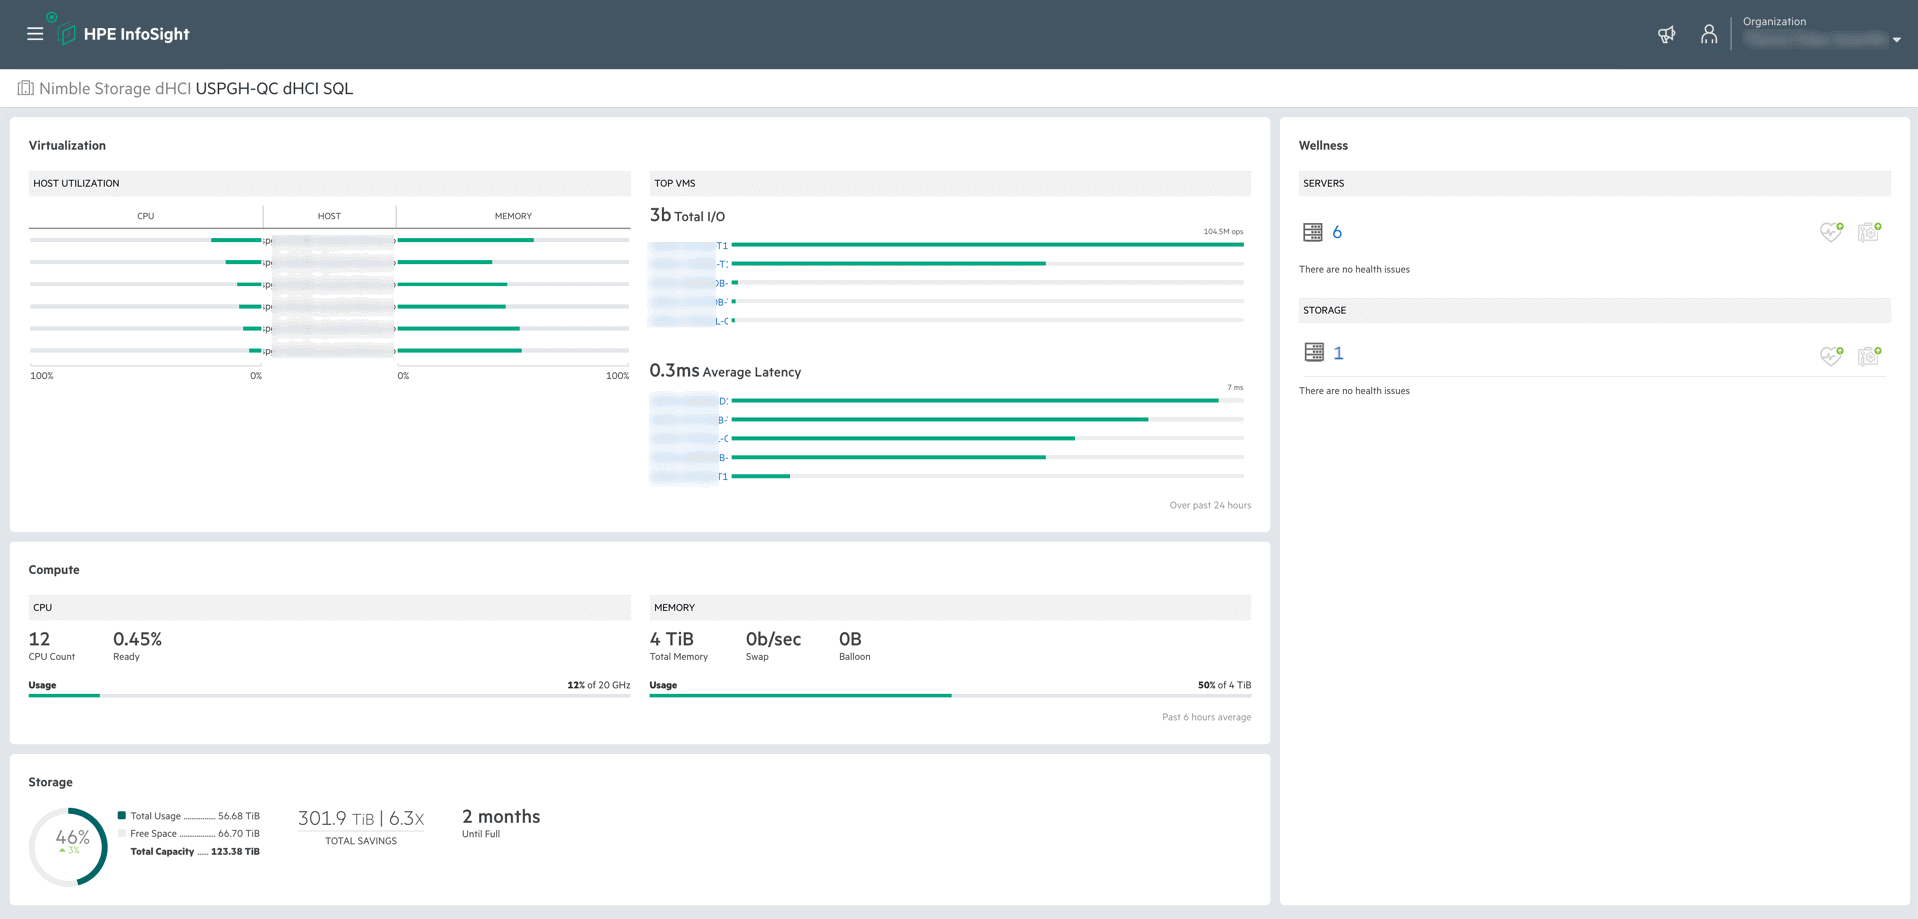 Dashboard view from HPE InfoSight